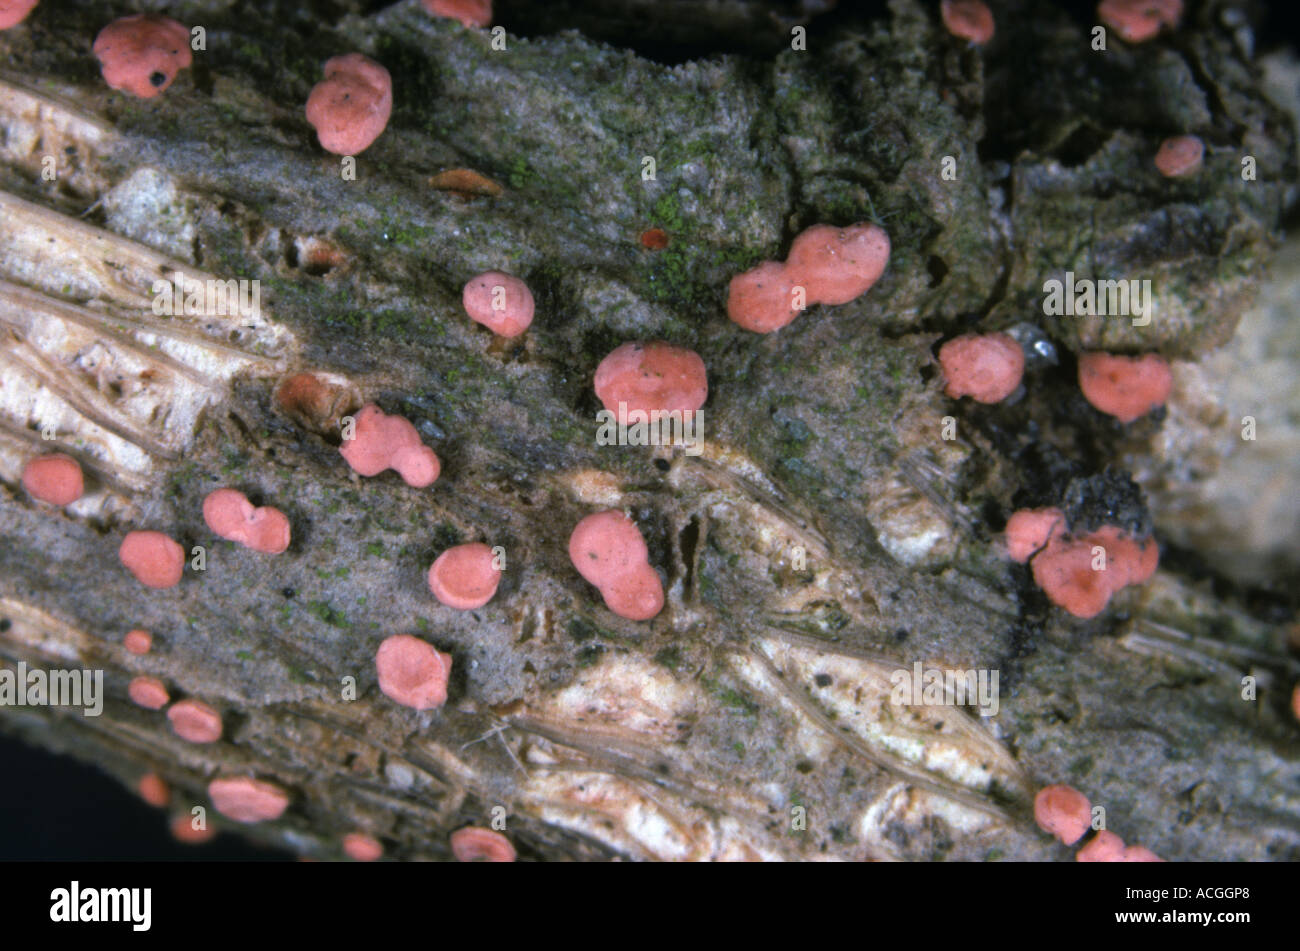 Coral Spot Nectria cinnabarina fruiting bodies on dead wood of tree mallow Lavatera spp Stock Photo